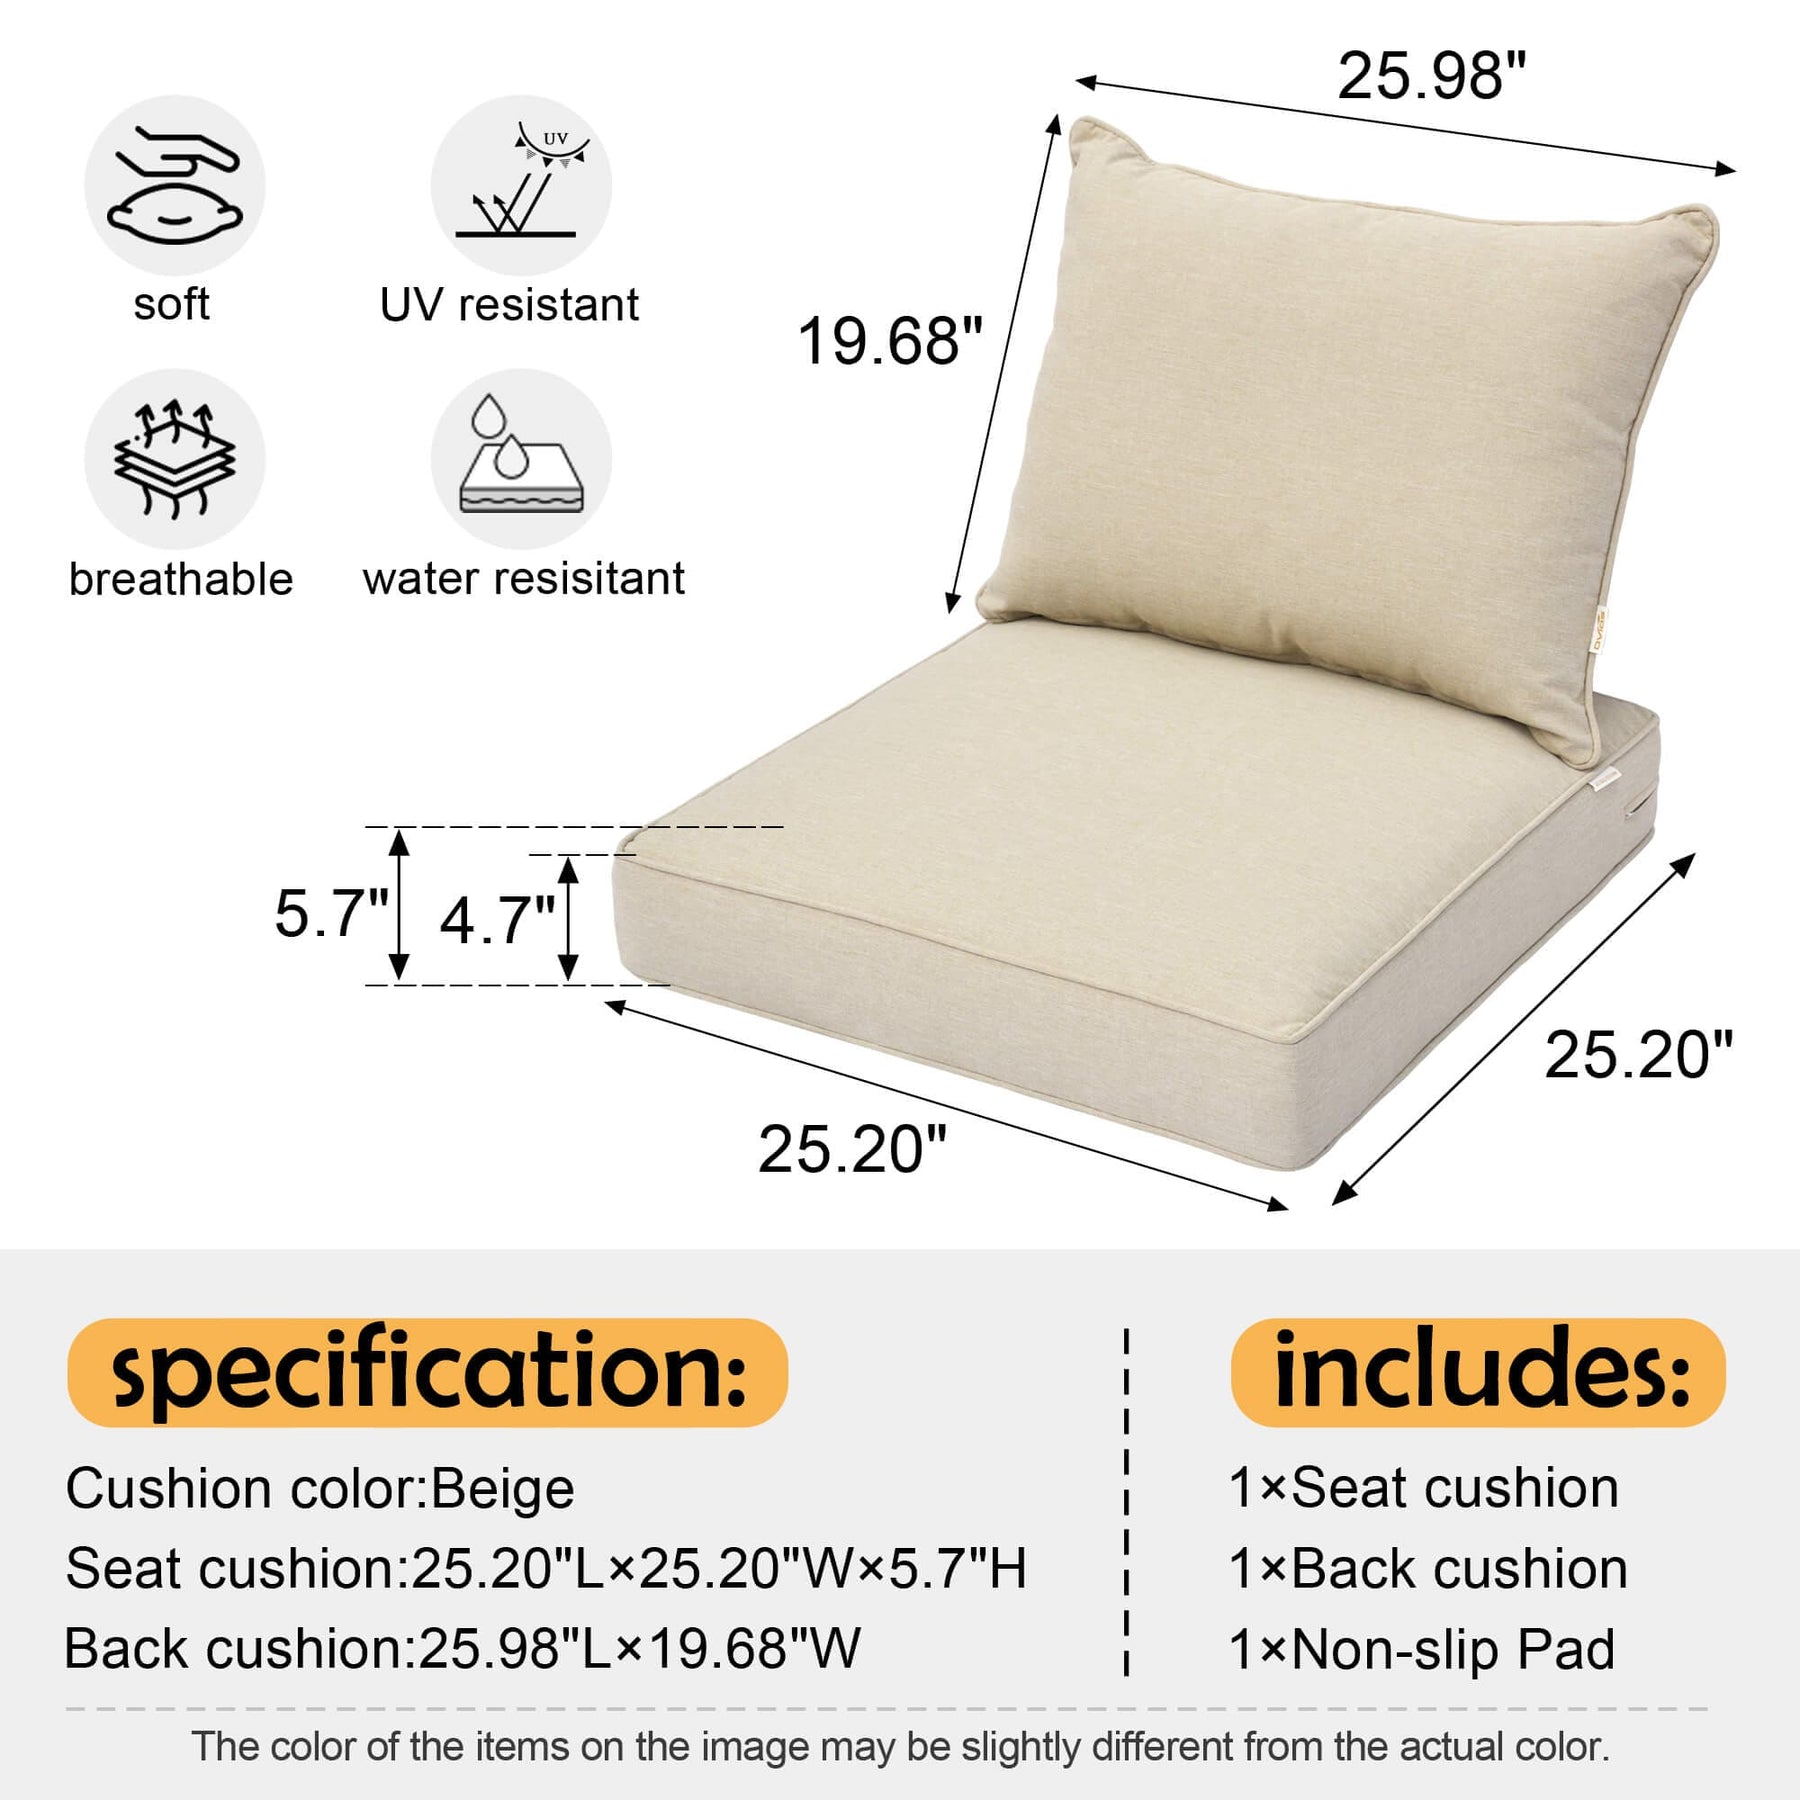 Ovios Replacement Seat Back Cushions Set with Olefin Fabric and Zipper, 25'' x 25'', Not suitable for Ovios Patio Furniture